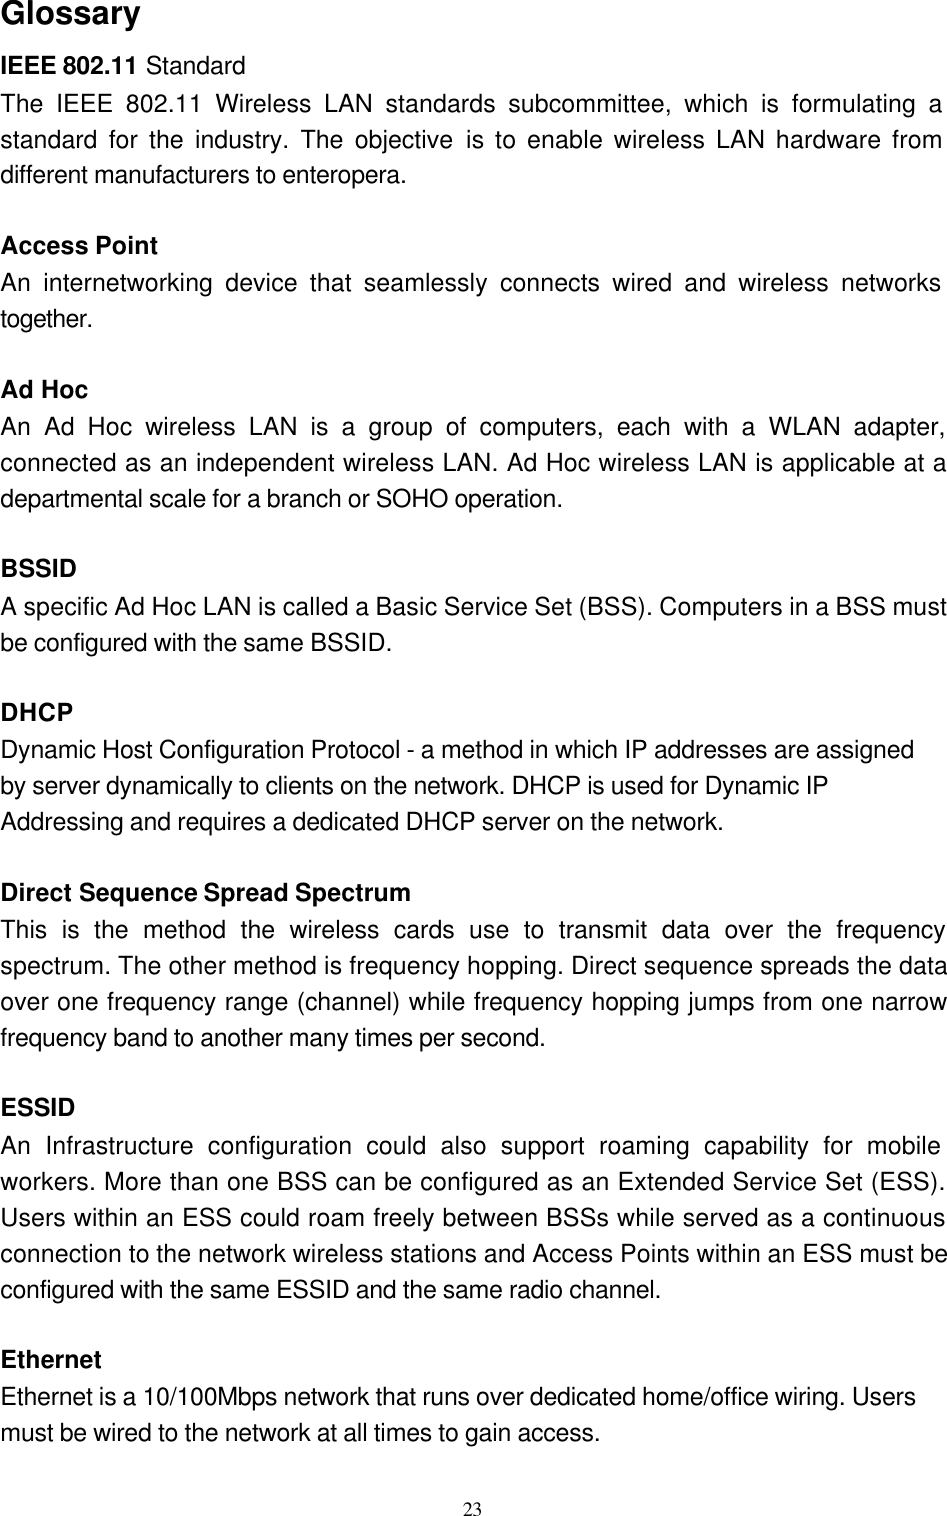   23 Glossary IEEE 802.11 Standard The IEEE 802.11 Wireless LAN standards subcommittee, which is formulating a standard for the industry. The objective is to enable wireless LAN hardware from different manufacturers to enteropera.  Access Point An internetworking device that seamlessly connects wired and wireless networks together.  Ad Hoc   An Ad Hoc wireless LAN is a group of computers, each with a WLAN adapter, connected as an independent wireless LAN. Ad Hoc wireless LAN is applicable at a departmental scale for a branch or SOHO operation.  BSSID A specific Ad Hoc LAN is called a Basic Service Set (BSS). Computers in a BSS must be configured with the same BSSID.  DHCP Dynamic Host Configuration Protocol - a method in which IP addresses are assigned by server dynamically to clients on the network. DHCP is used for Dynamic IP Addressing and requires a dedicated DHCP server on the network.  Direct Sequence Spread Spectrum This is the method the wireless cards use to transmit data over the frequency spectrum. The other method is frequency hopping. Direct sequence spreads the data over one frequency range (channel) while frequency hopping jumps from one narrow frequency band to another many times per second.  ESSID An Infrastructure configuration could also support roaming capability for mobile workers. More than one BSS can be configured as an Extended Service Set (ESS). Users within an ESS could roam freely between BSSs while served as a continuous connection to the network wireless stations and Access Points within an ESS must be configured with the same ESSID and the same radio channel.  Ethernet Ethernet is a 10/100Mbps network that runs over dedicated home/office wiring. Users must be wired to the network at all times to gain access. 